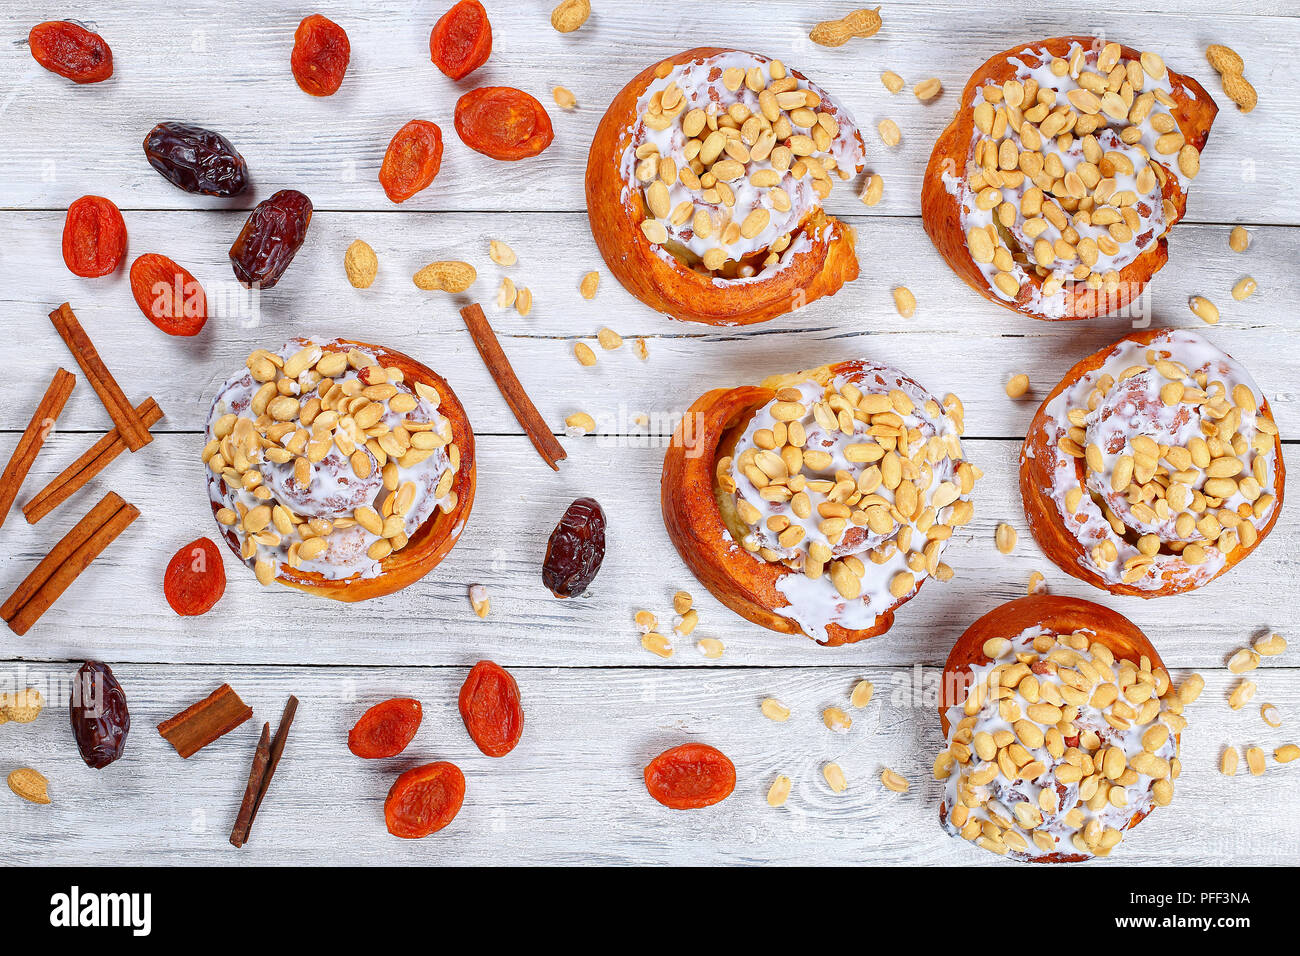 delicious freshly baked homemade cinnamon rolls topped with peanuts on wooden table with dried apricot, dried date fruits and cinnamon sticks, view fr Stock Photo